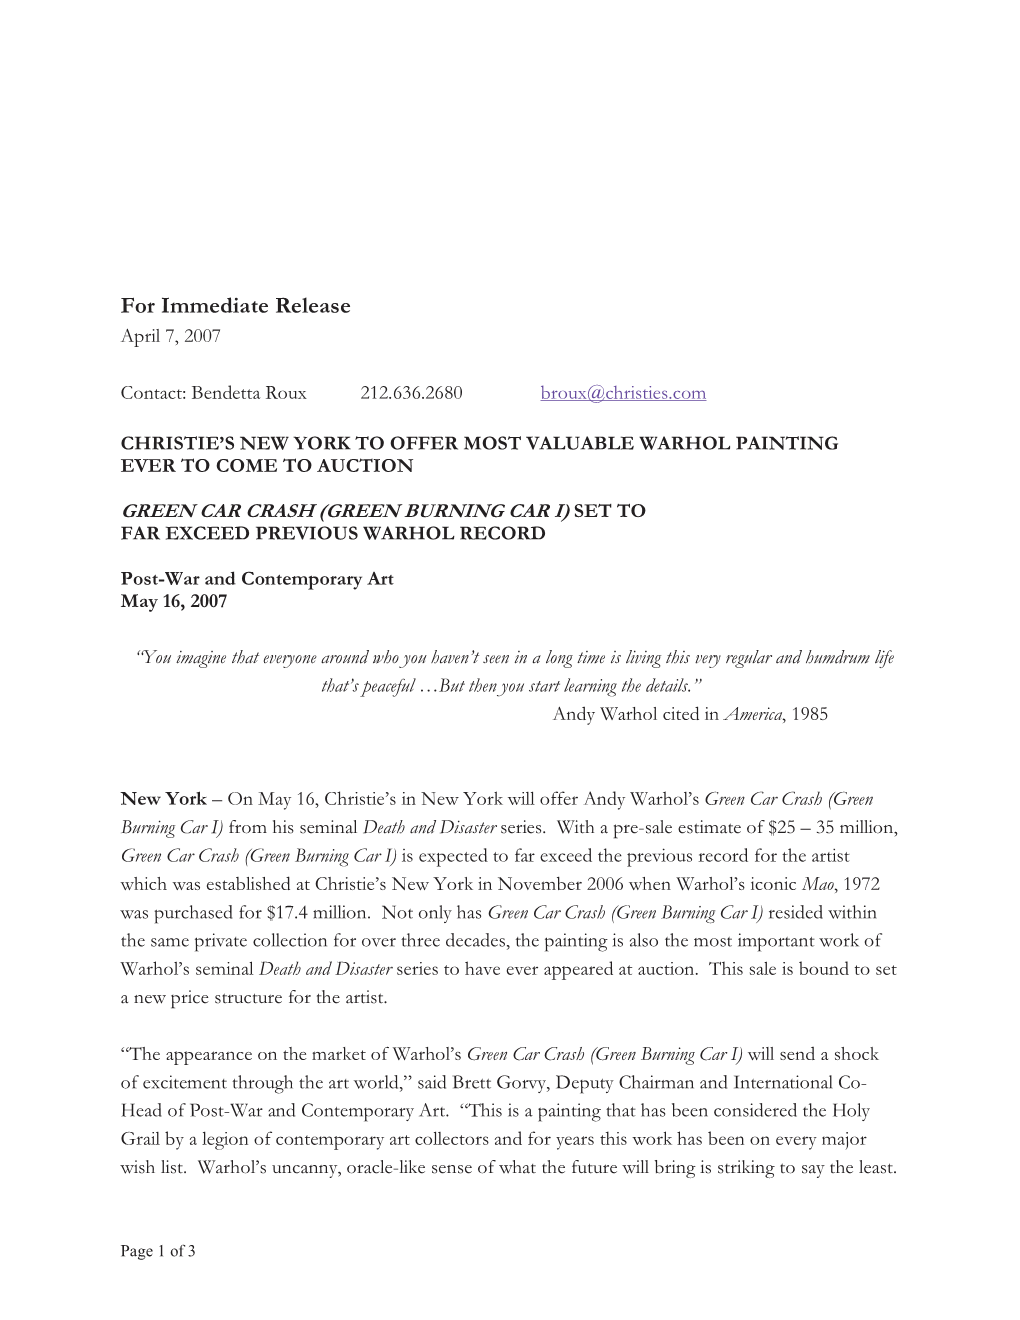 For Immediate Release April 7, 2007